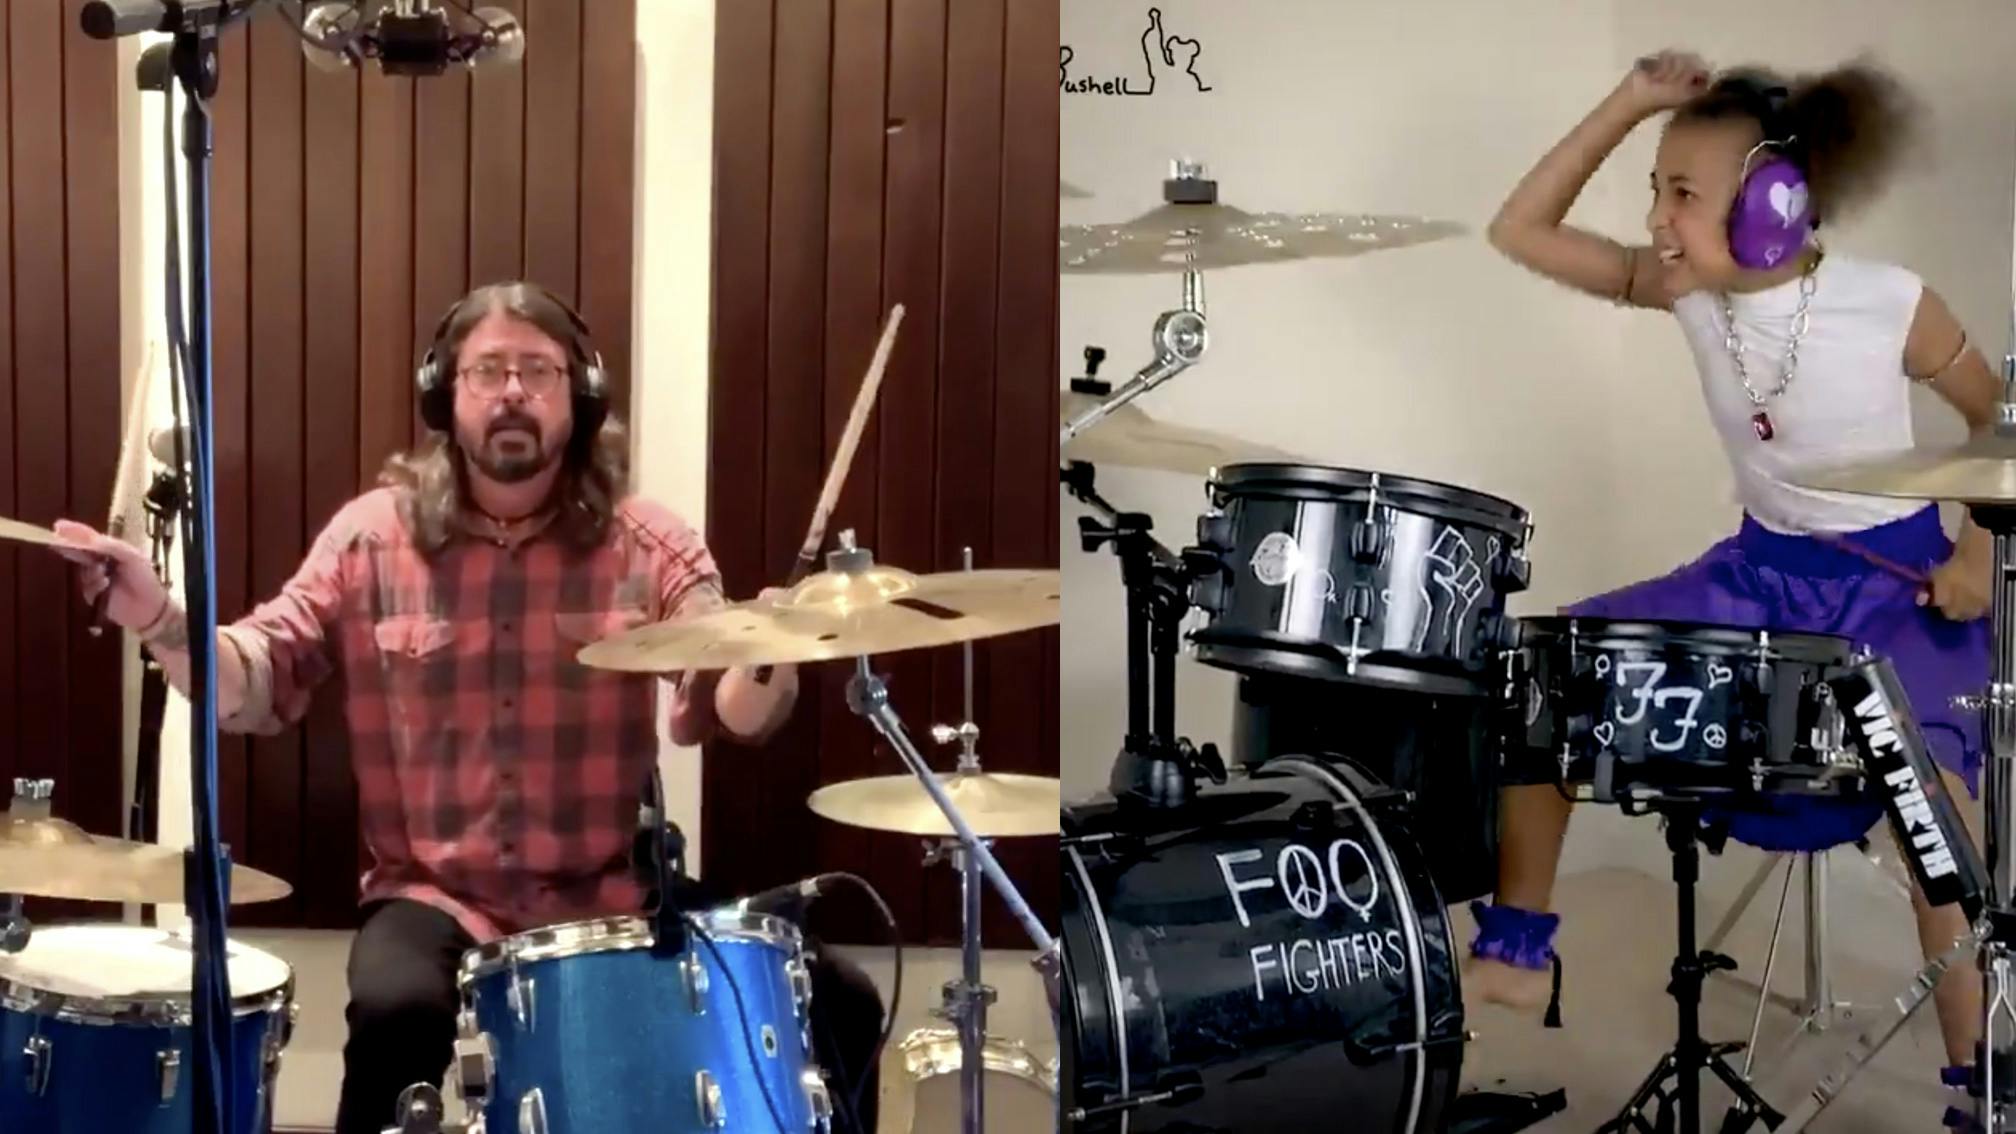 "People would smile because a 10-year-old girl was kicking my f*cking ass": Dave Grohl on his Nandi Bushell drum battle